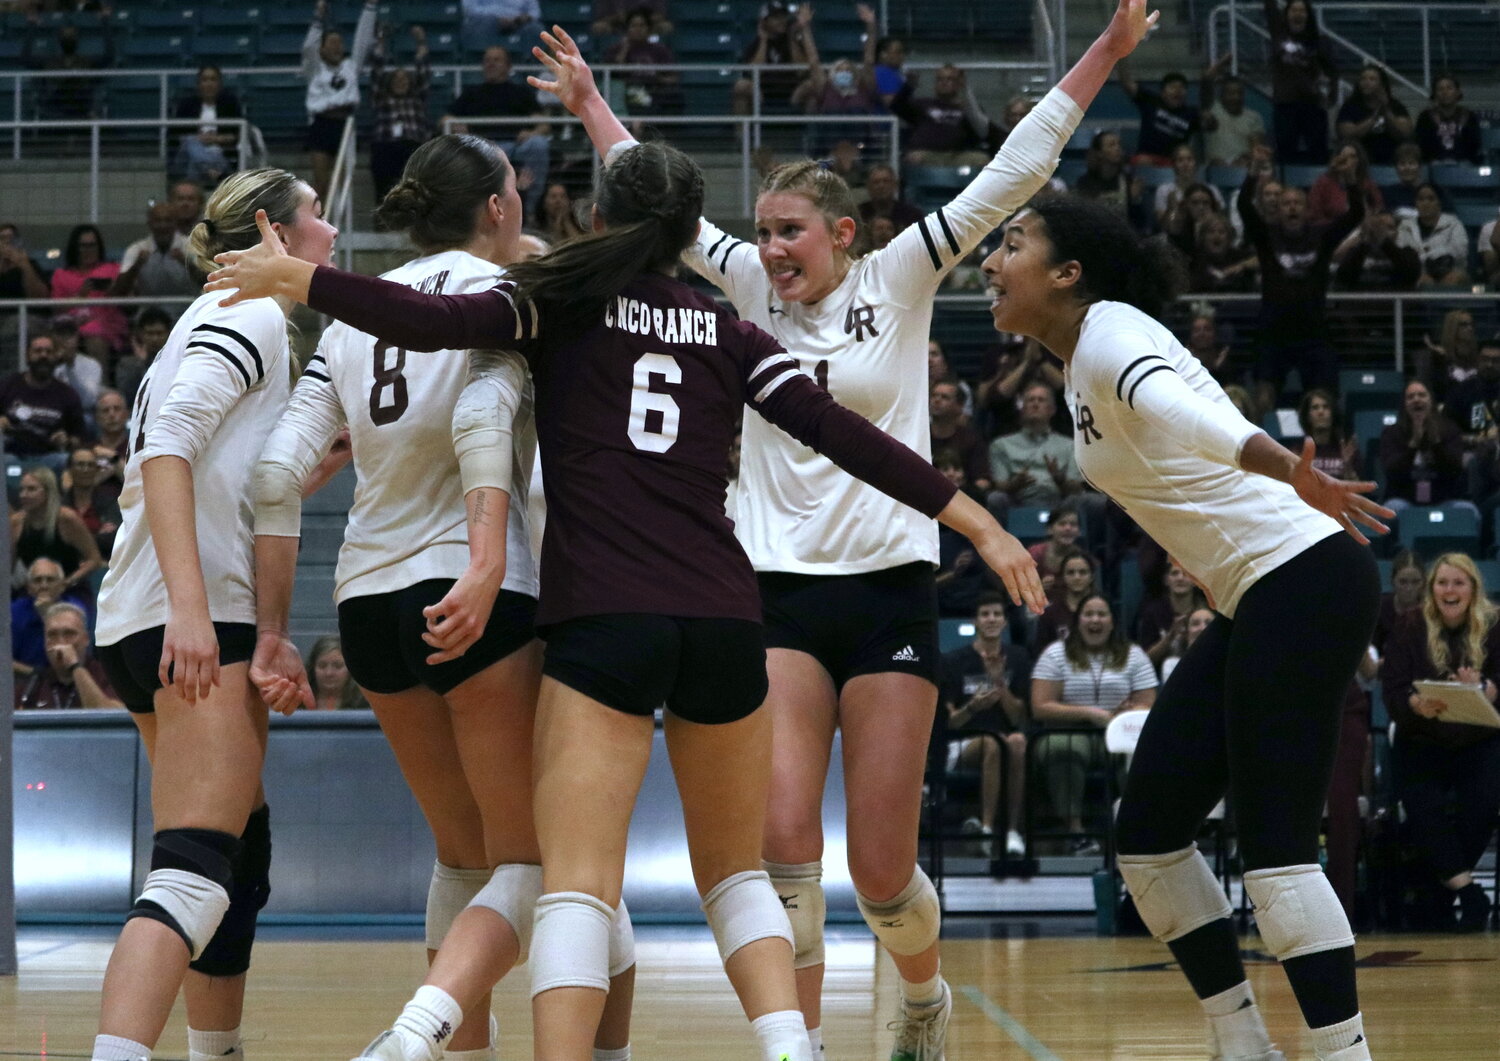 Cinco Ranch celebrates after winning a set during Tuesday’s match between Cinco Ranch and Cy-Fair at the Merrell Center.